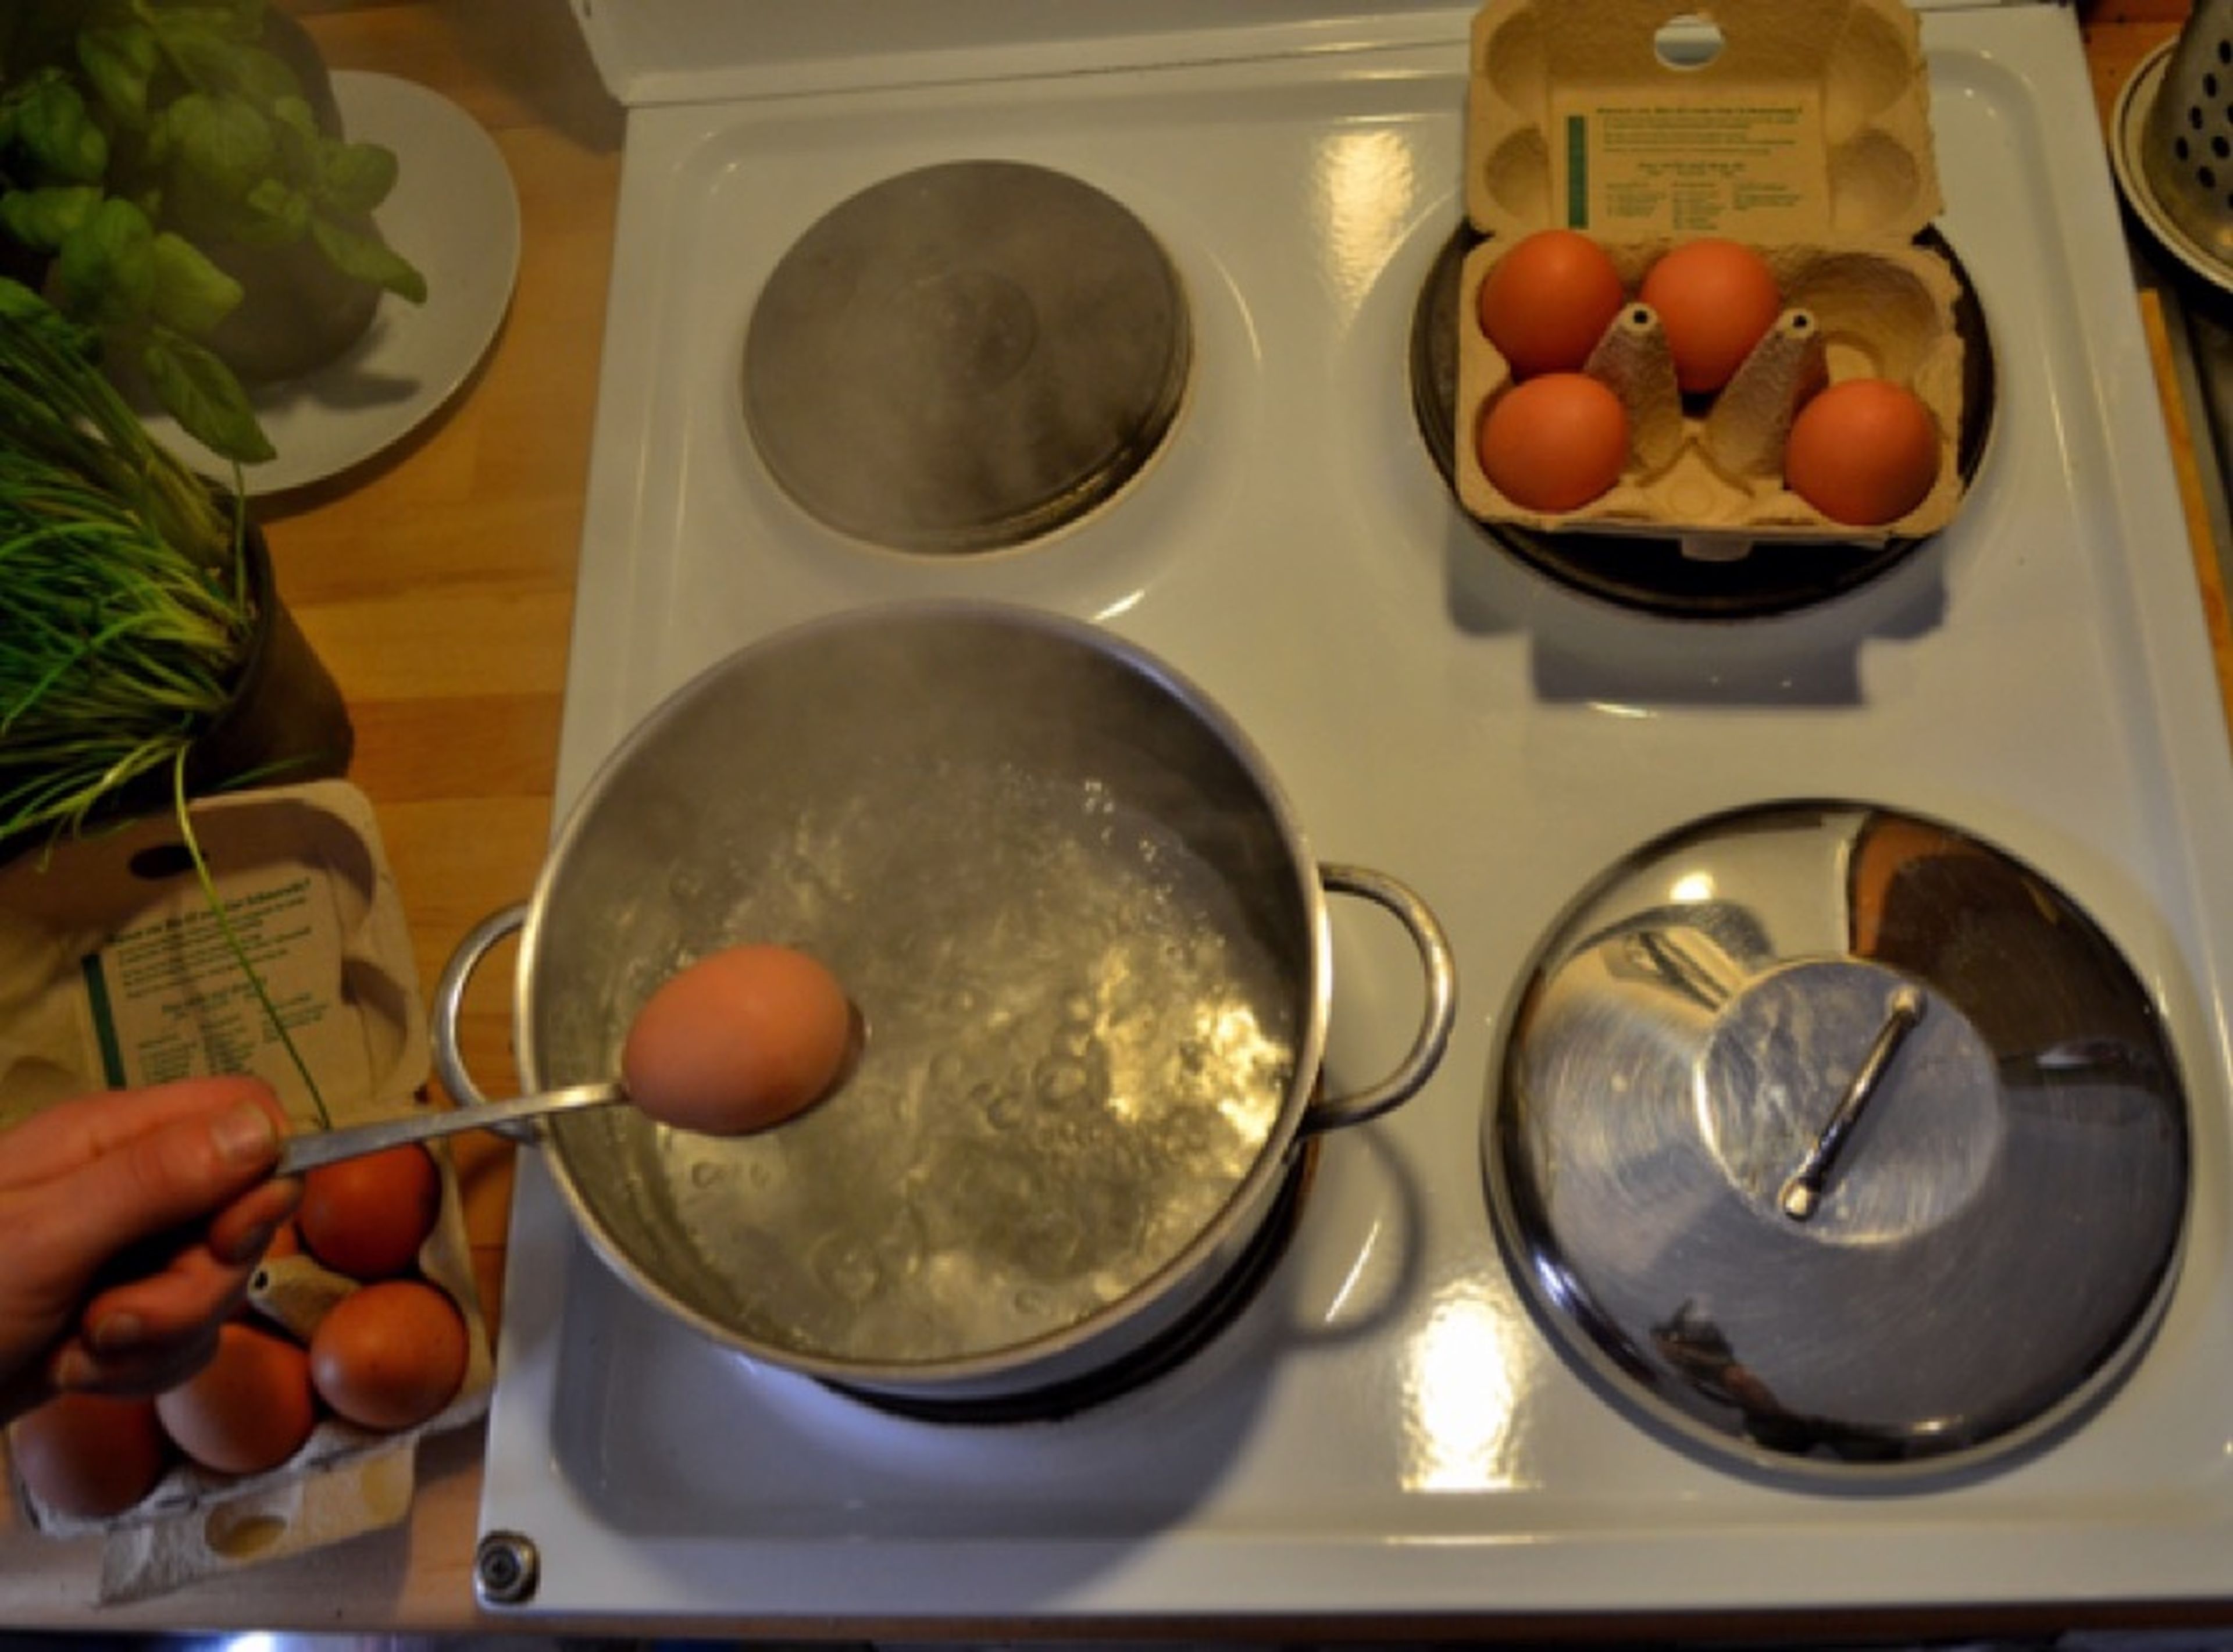 Cook eggs for 9 min. until hard-boiled. Set side to cool down.